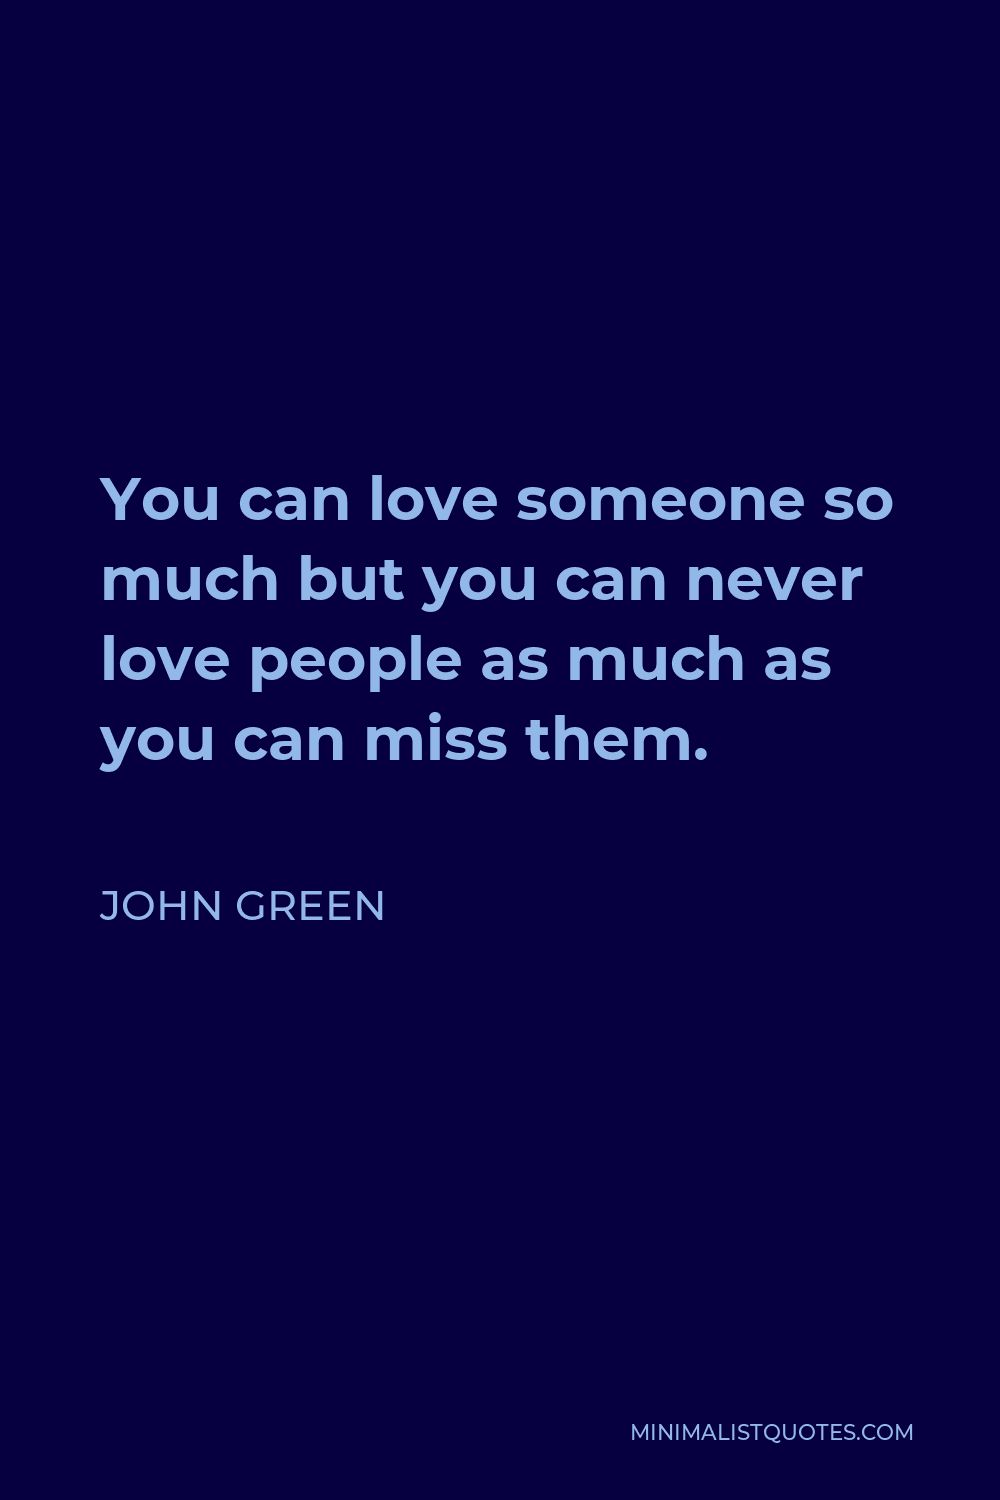 John Green Quote - You can love someone so much but you can never love people as much as you can miss them.